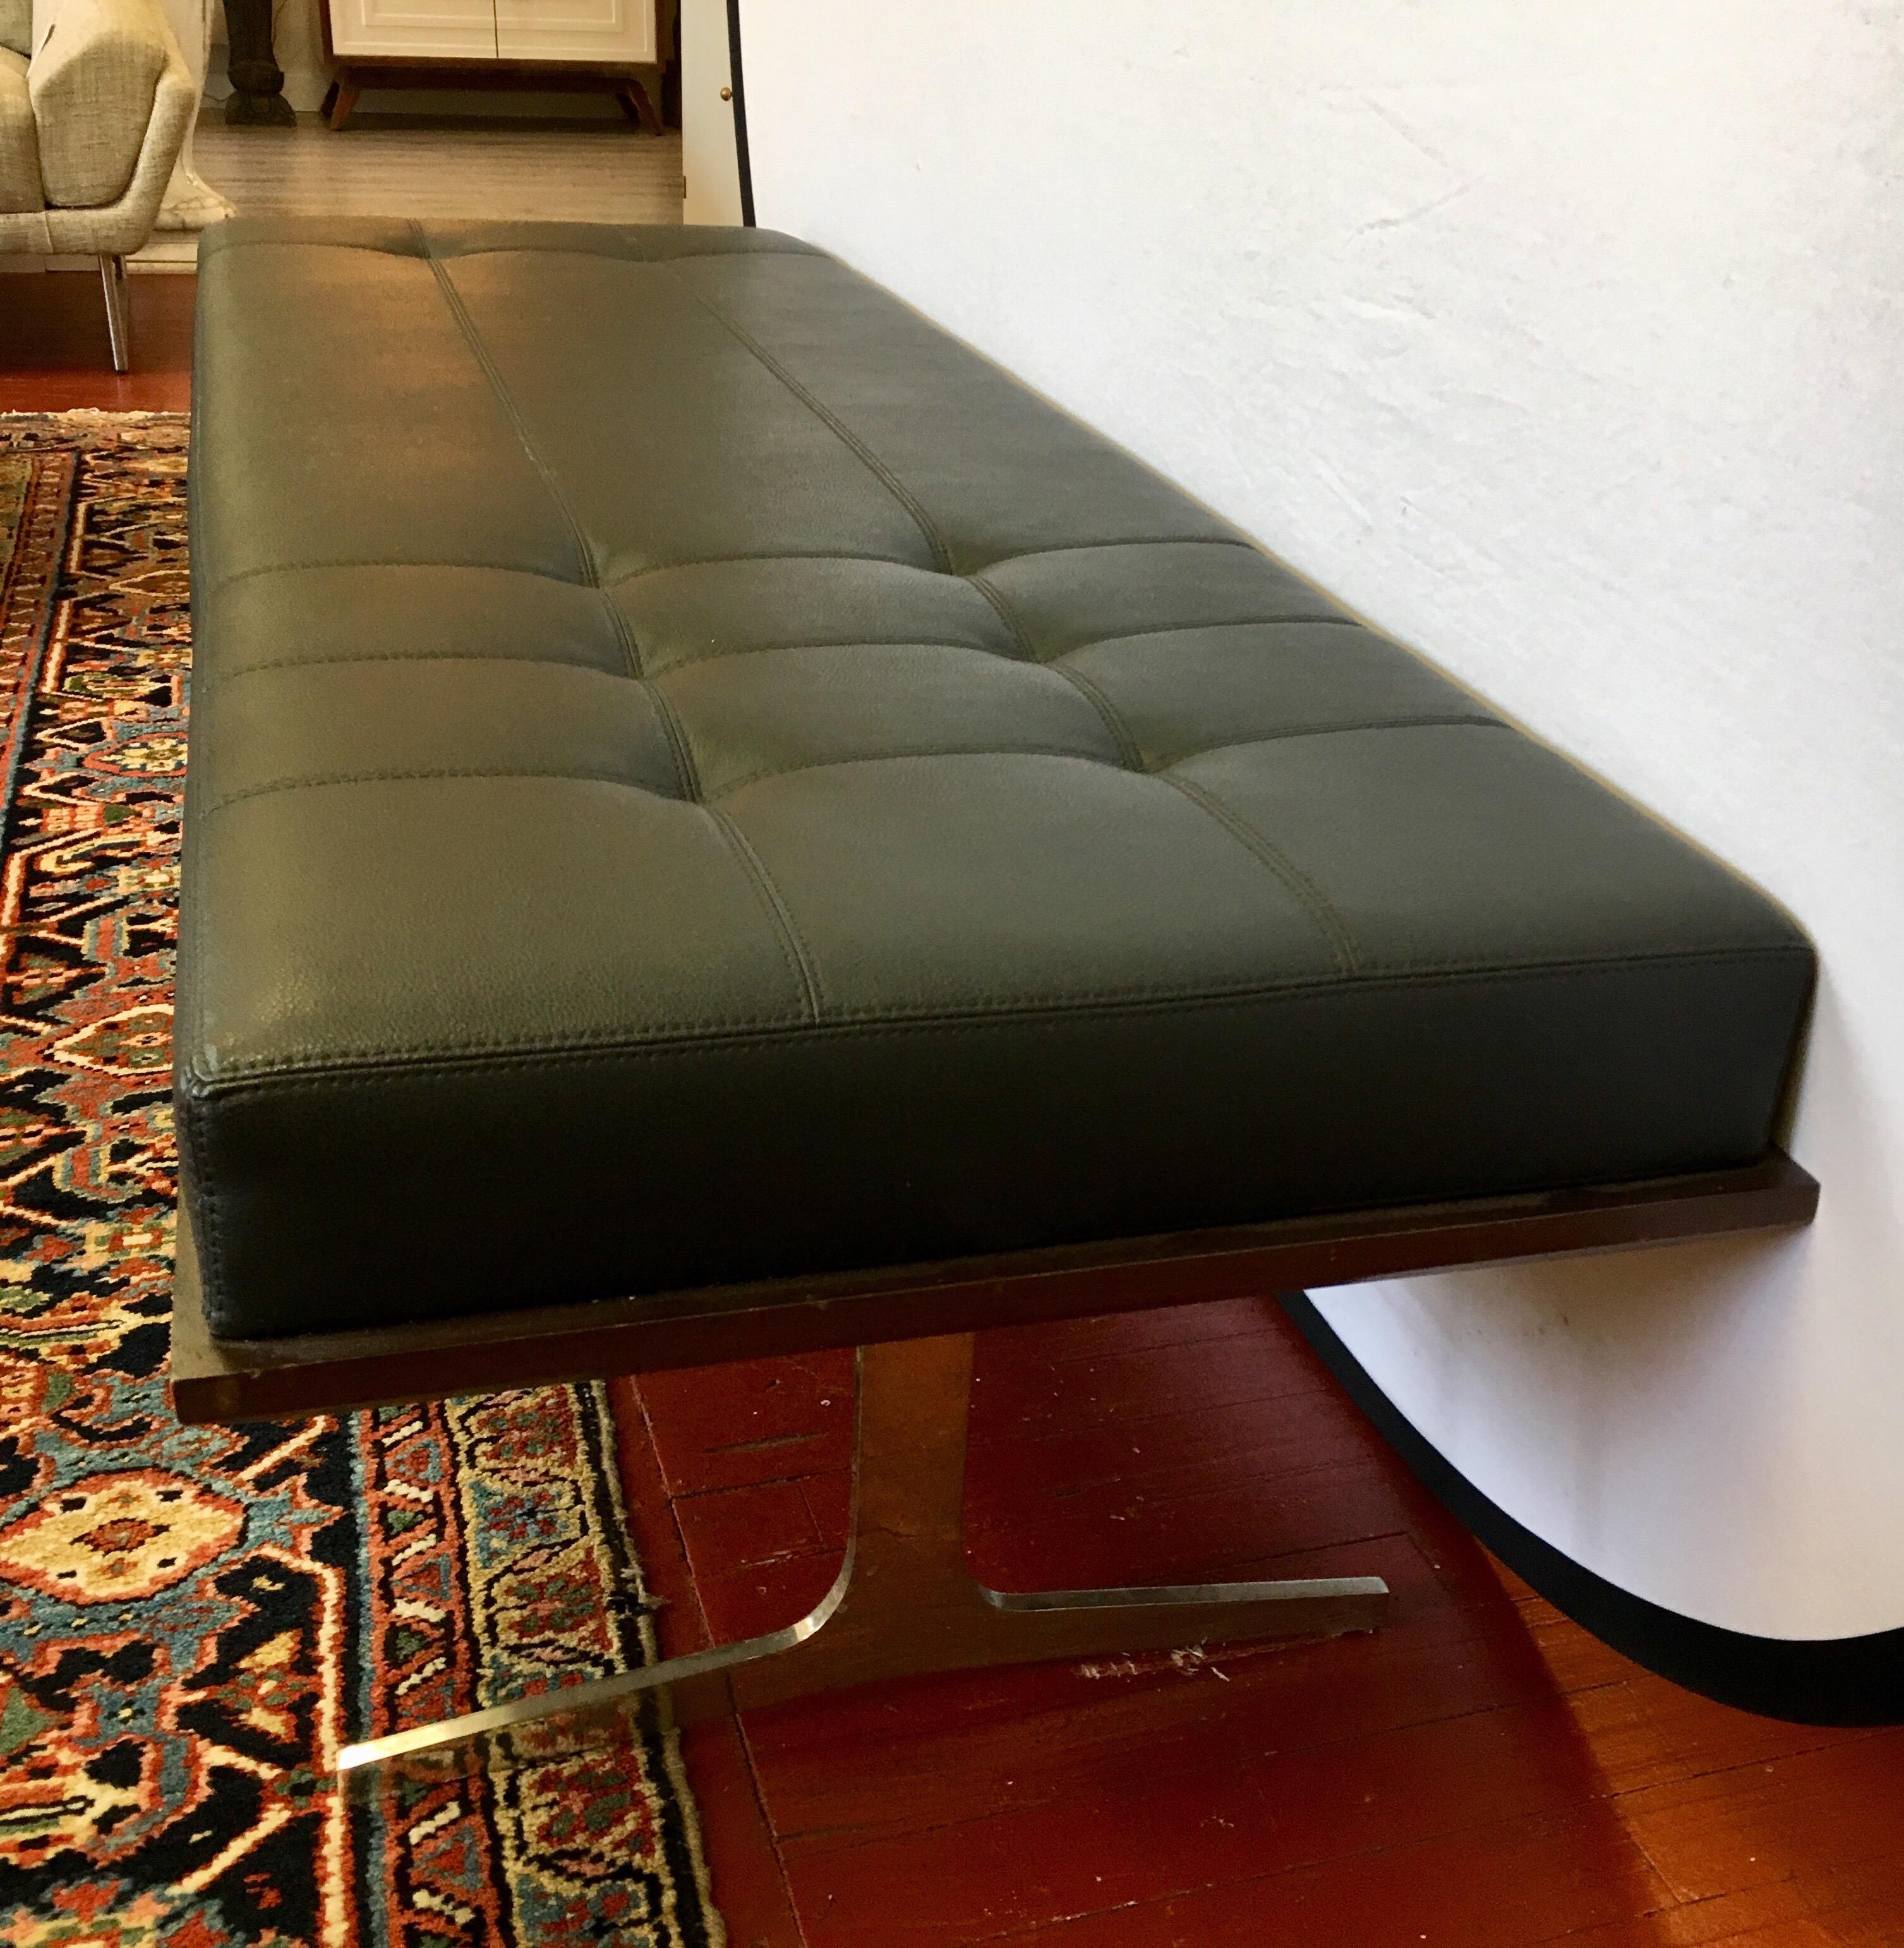 Elegant Berhardt black leather chaise lounge daybed with mahogany base and polished steel legs.
The leather is spectacular in its quality and quilting. This multi-purpose piece will make a great statement.